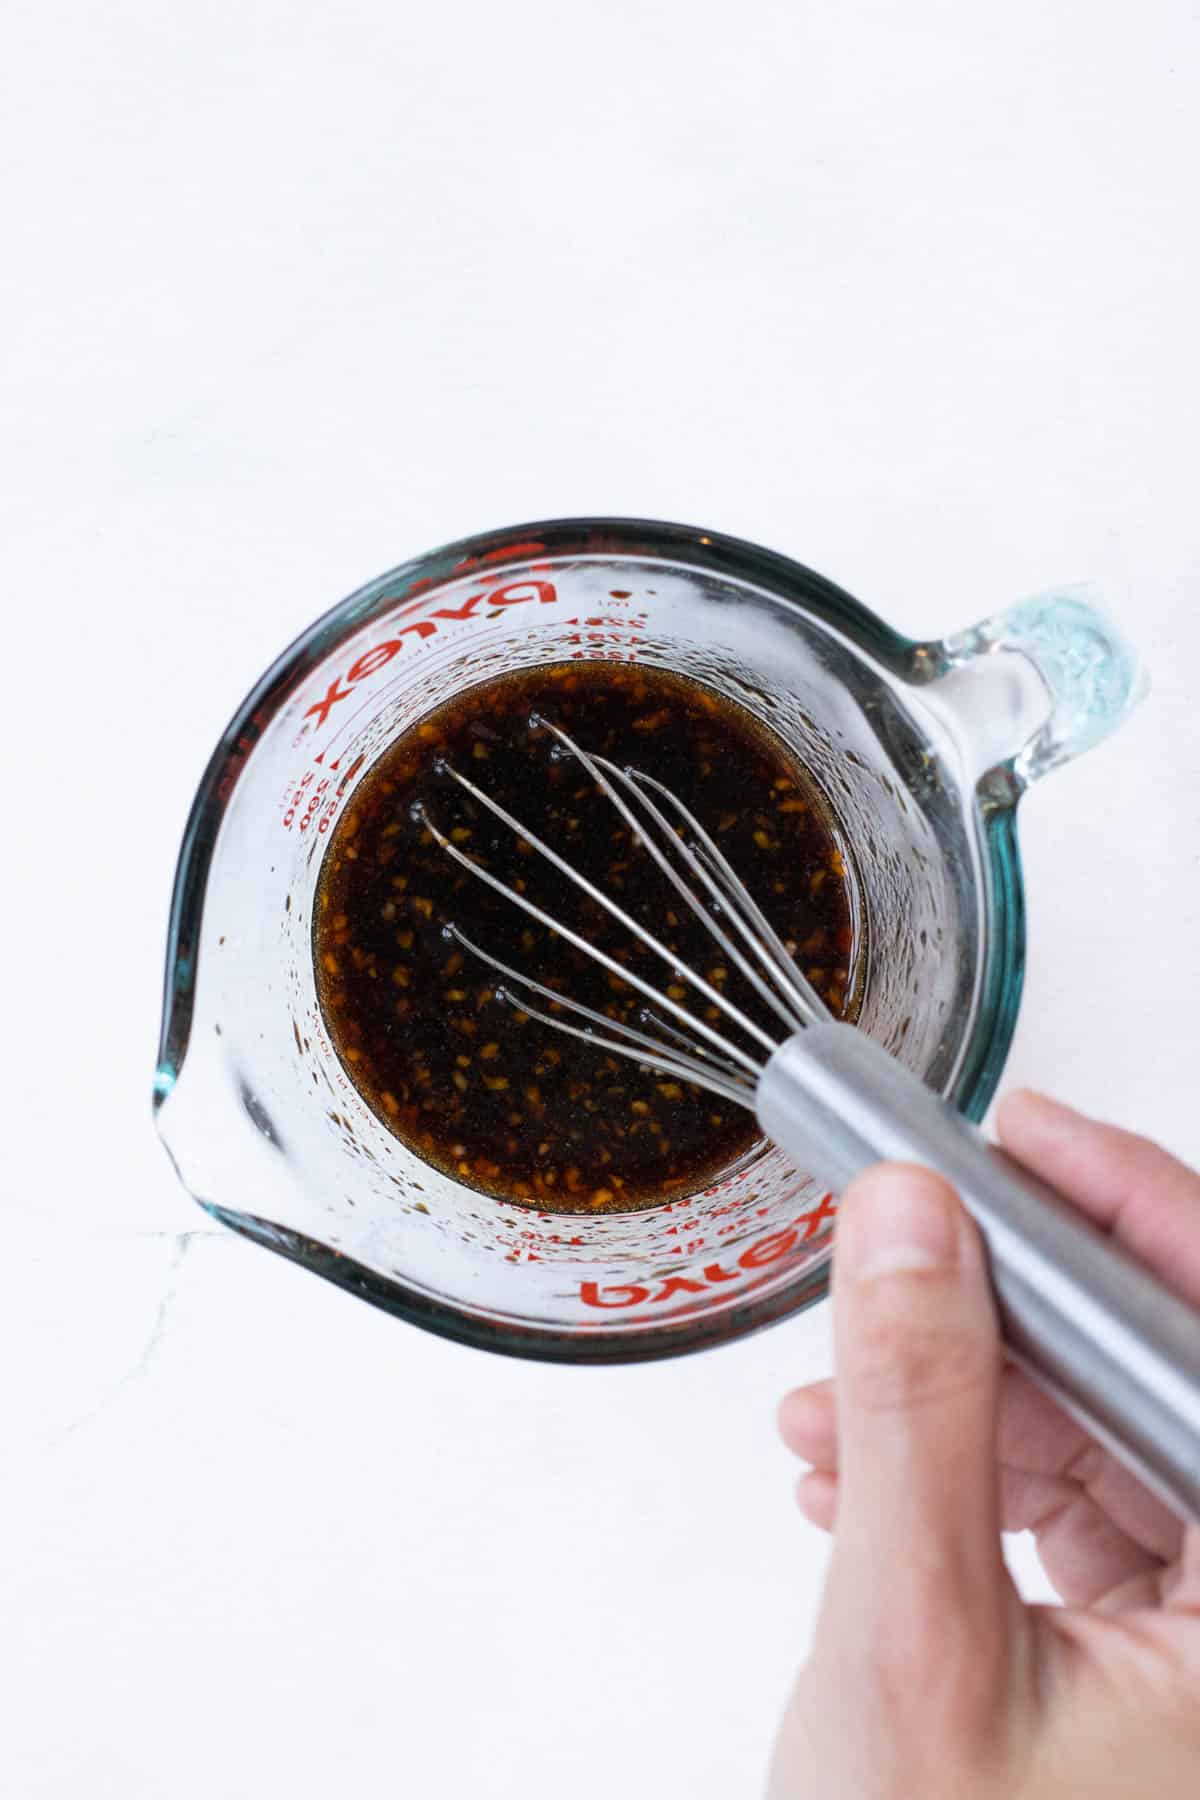 The teriyaki sauce ingredients are whisked together.